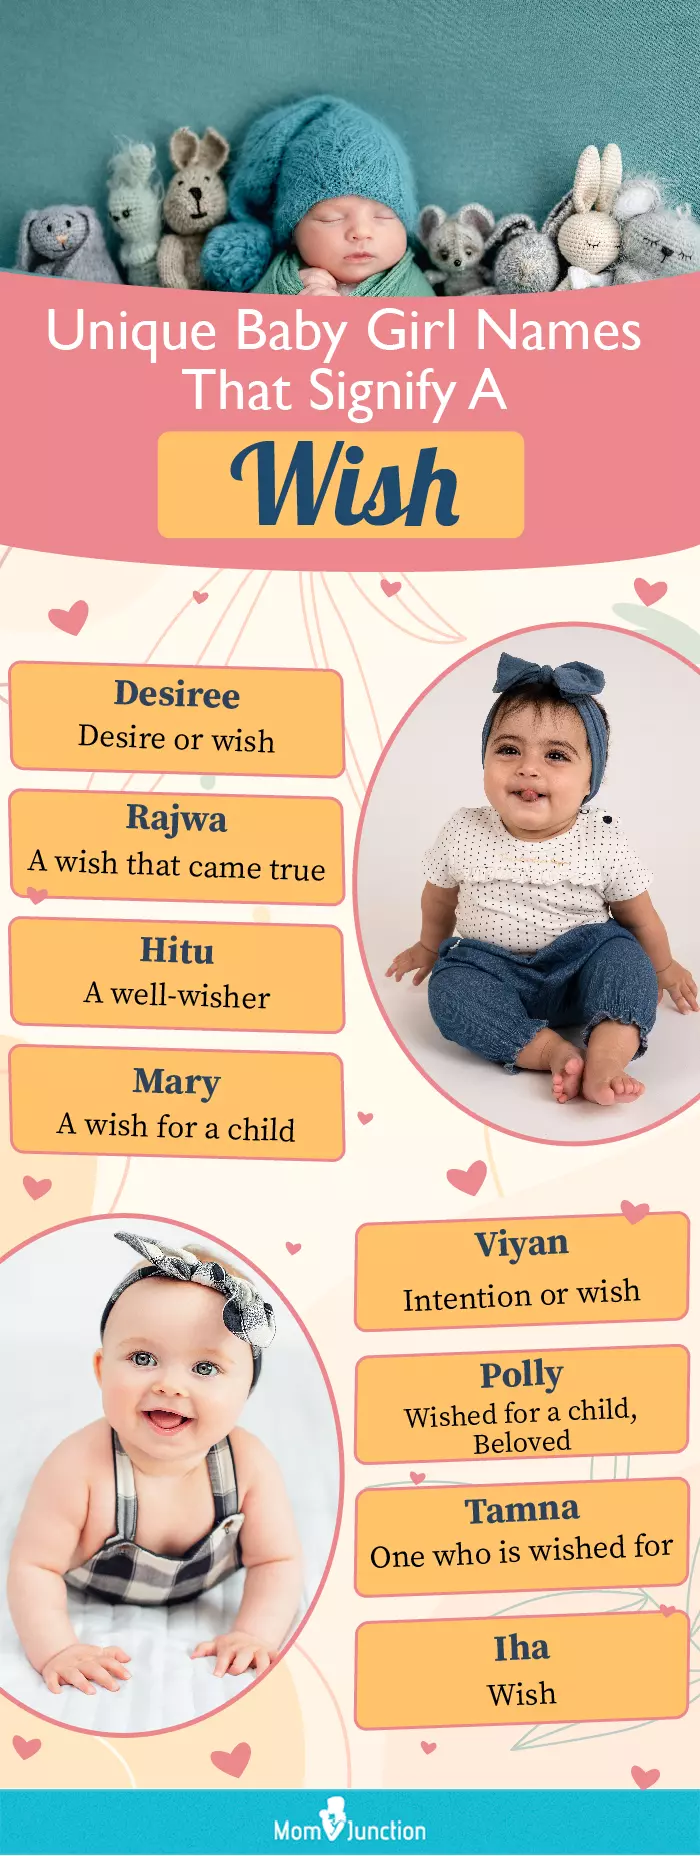 intriguing baby girl names that mean wish (infographic)